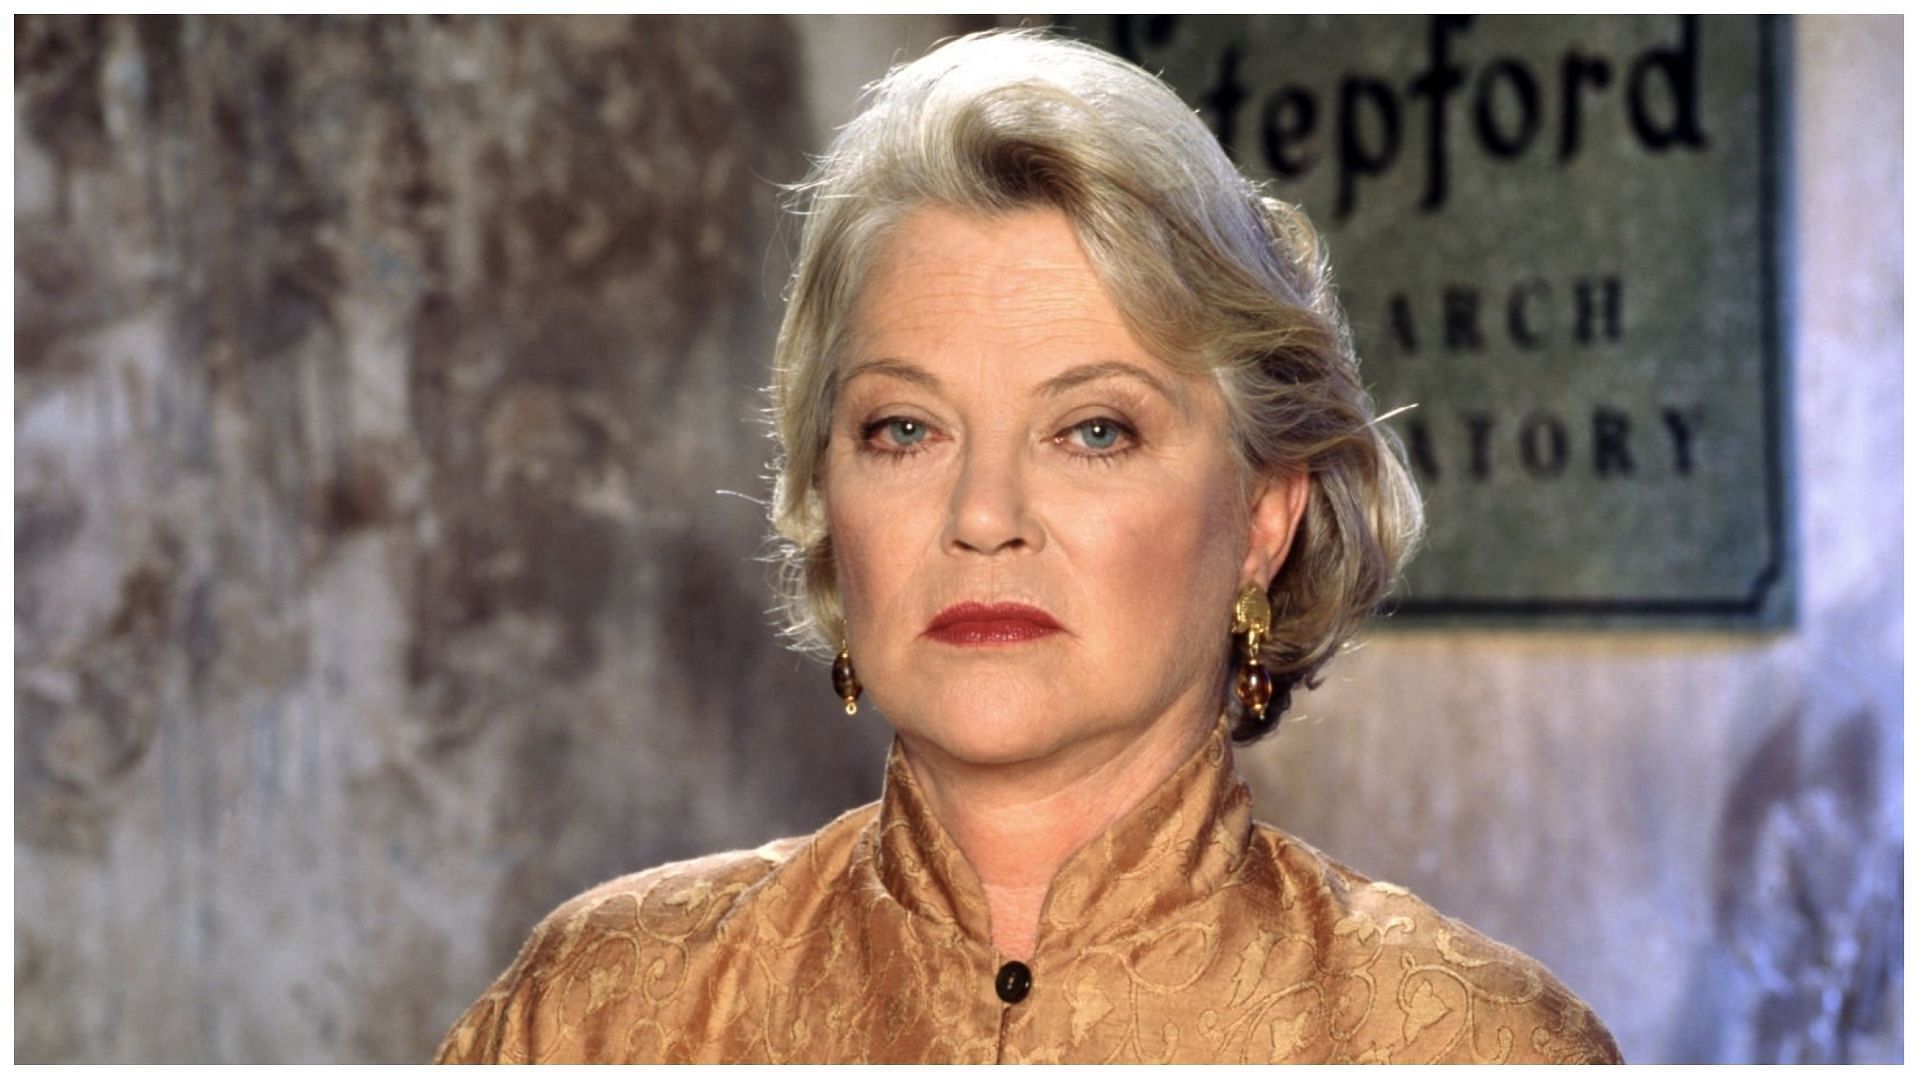 Louise Fletcher recently died at the age of 88 (Image via CBS/Getty Images)